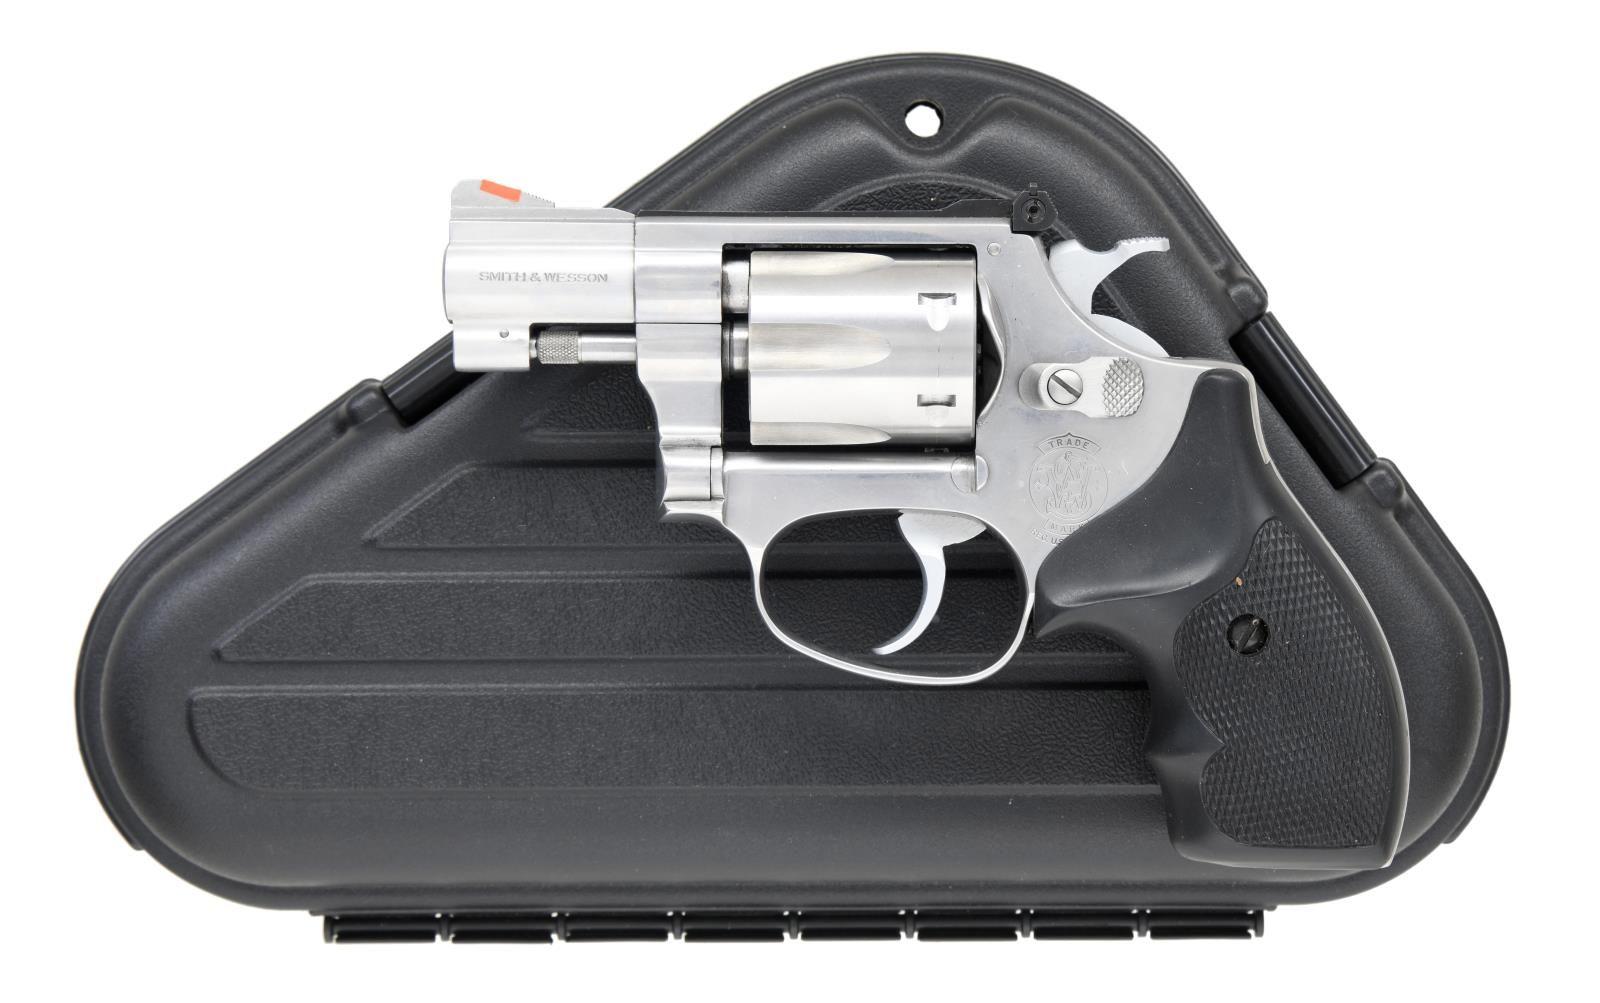 SMITH & WESSON MODEL 651-1 DOUBLE ACTION REVOLVER.